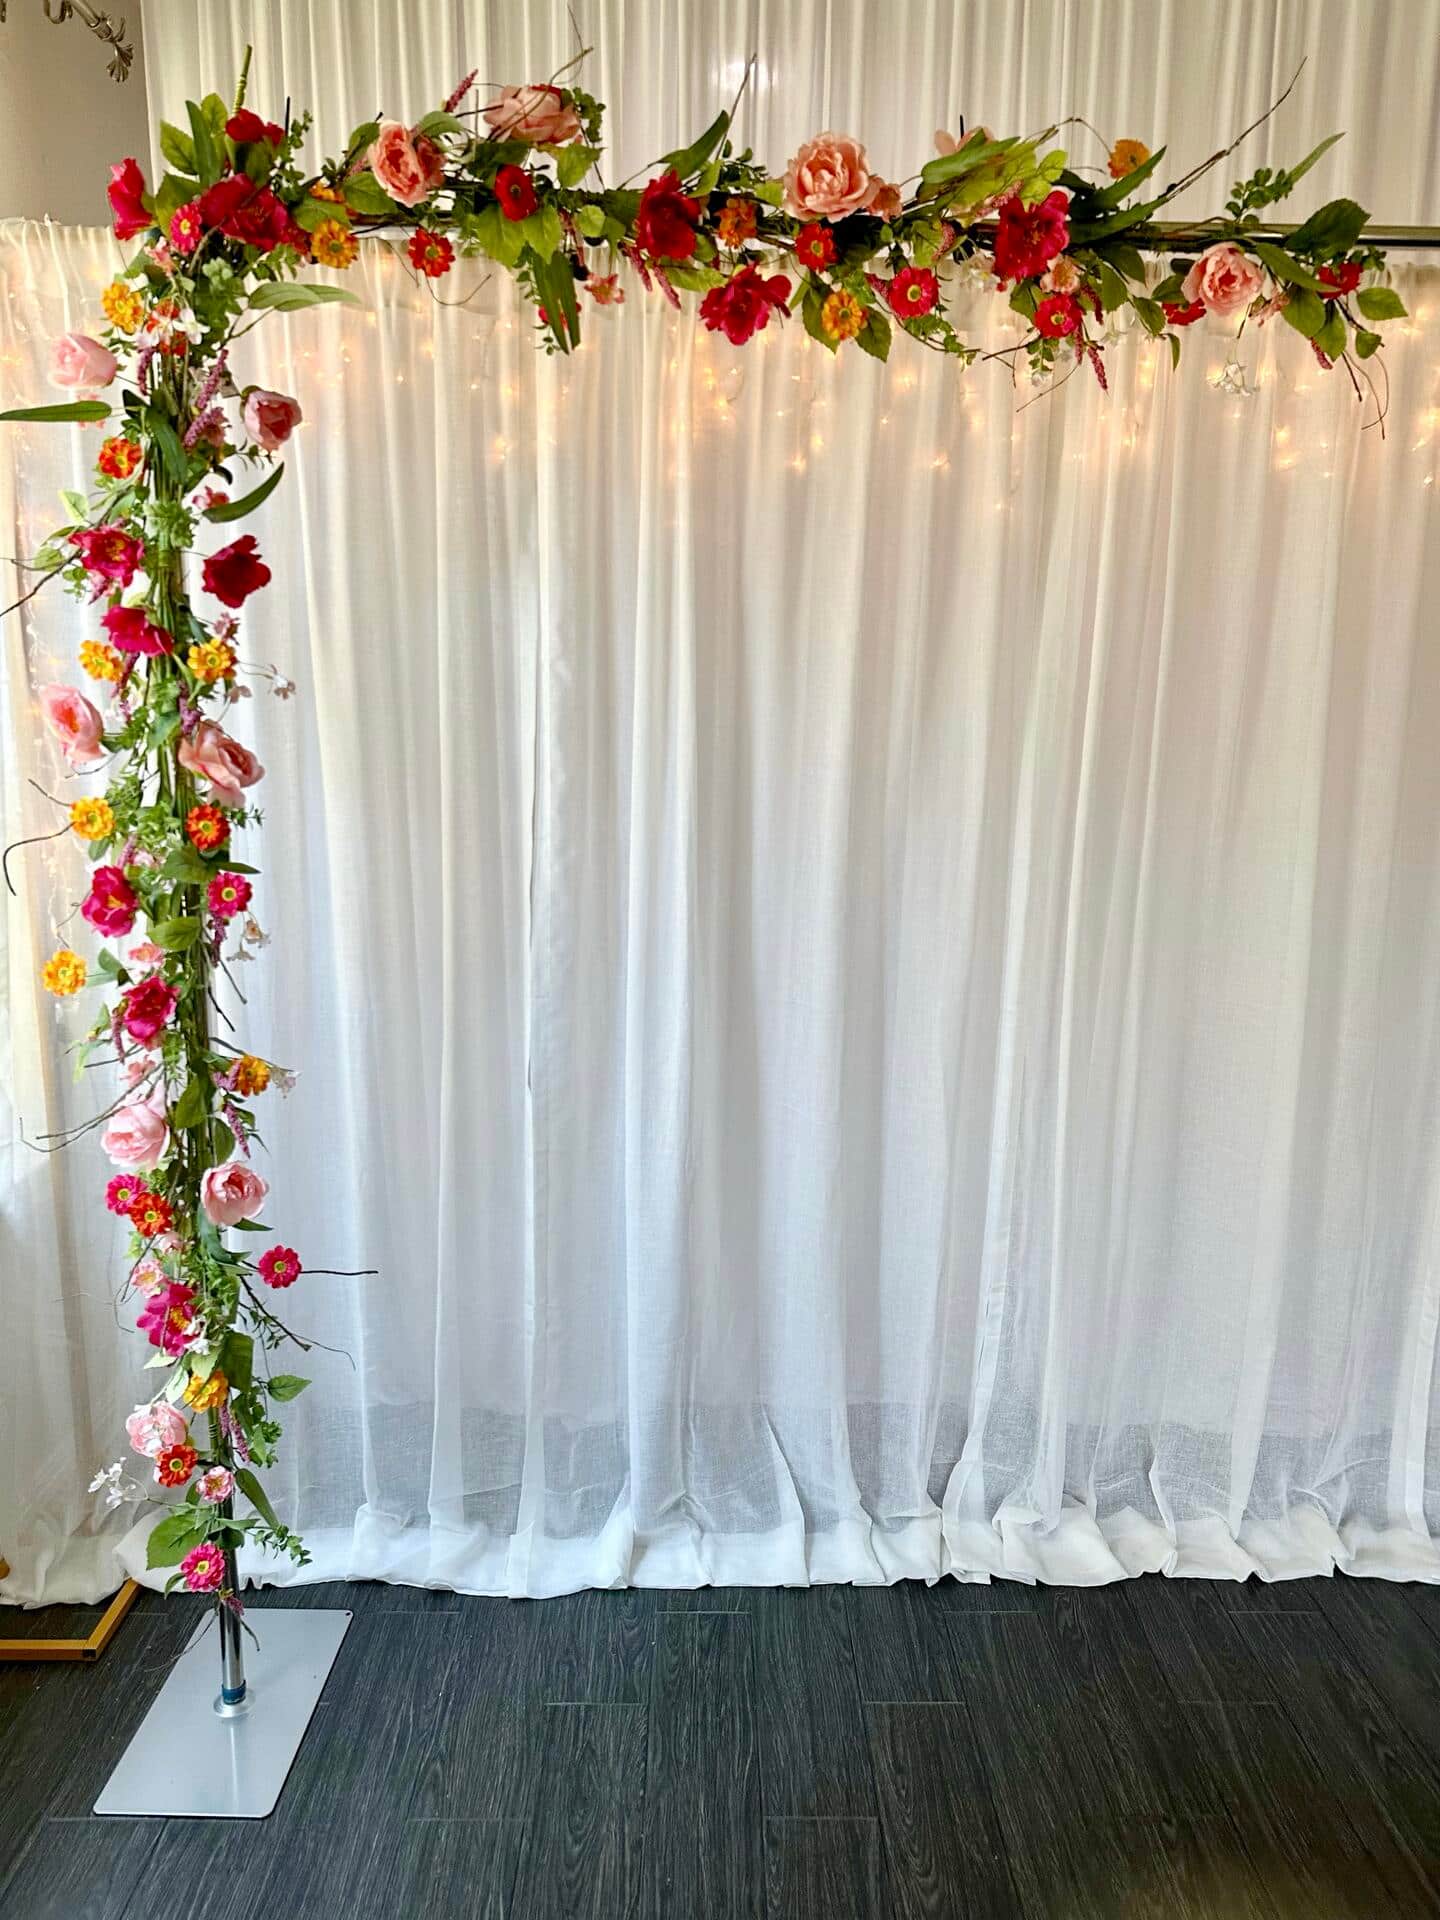 Artificial flower garlands on a backdrop stand